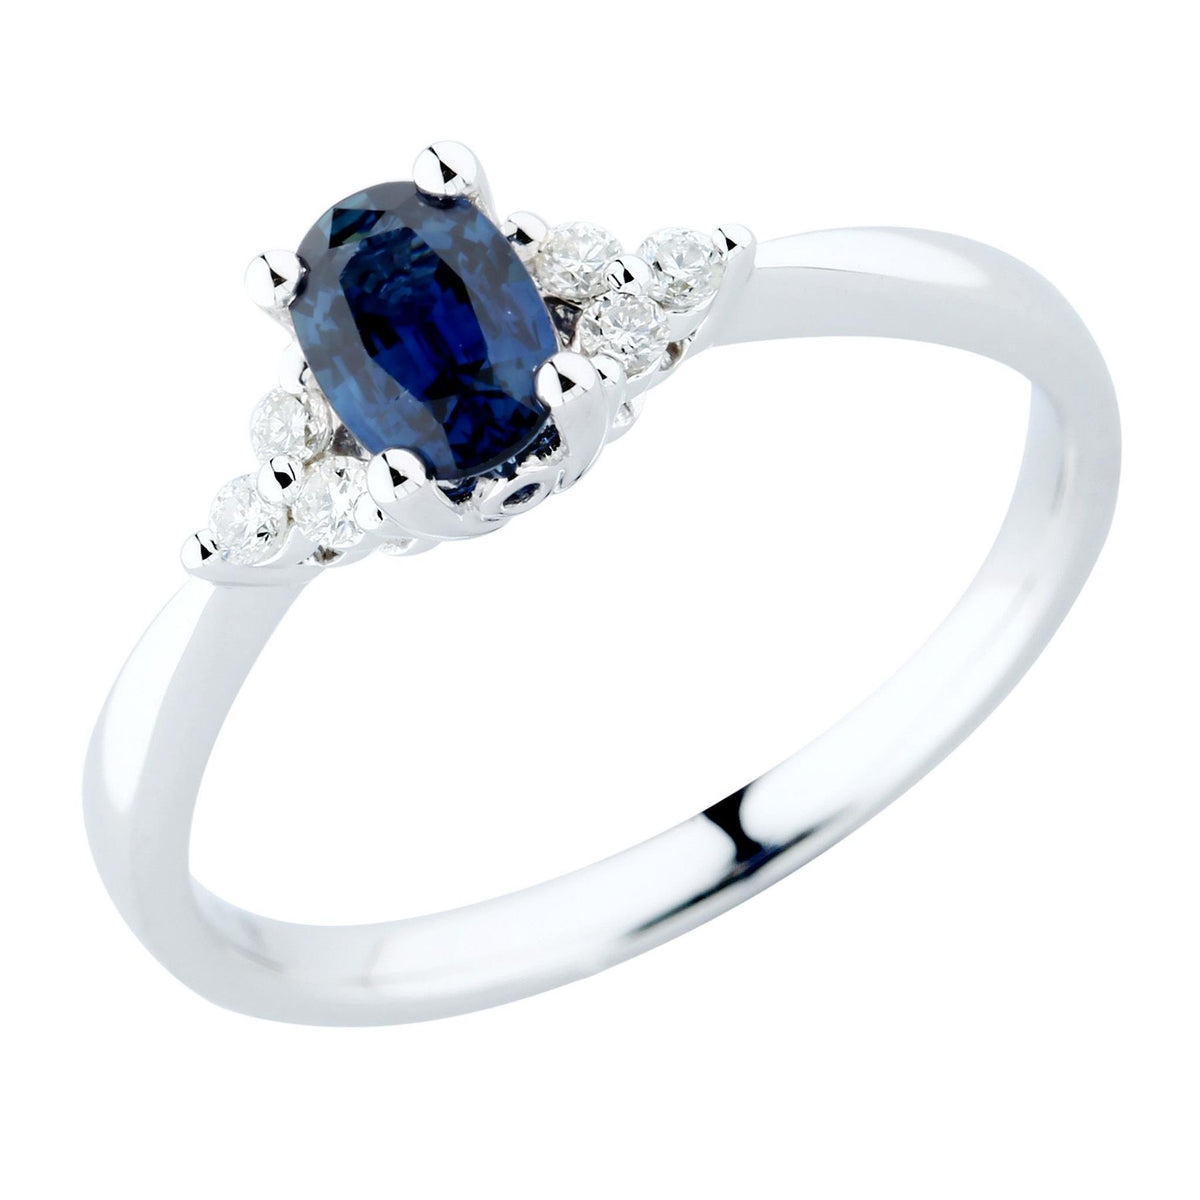 18Kt White Gold Classic Gemstone Ring With 0.84ct Sapphire